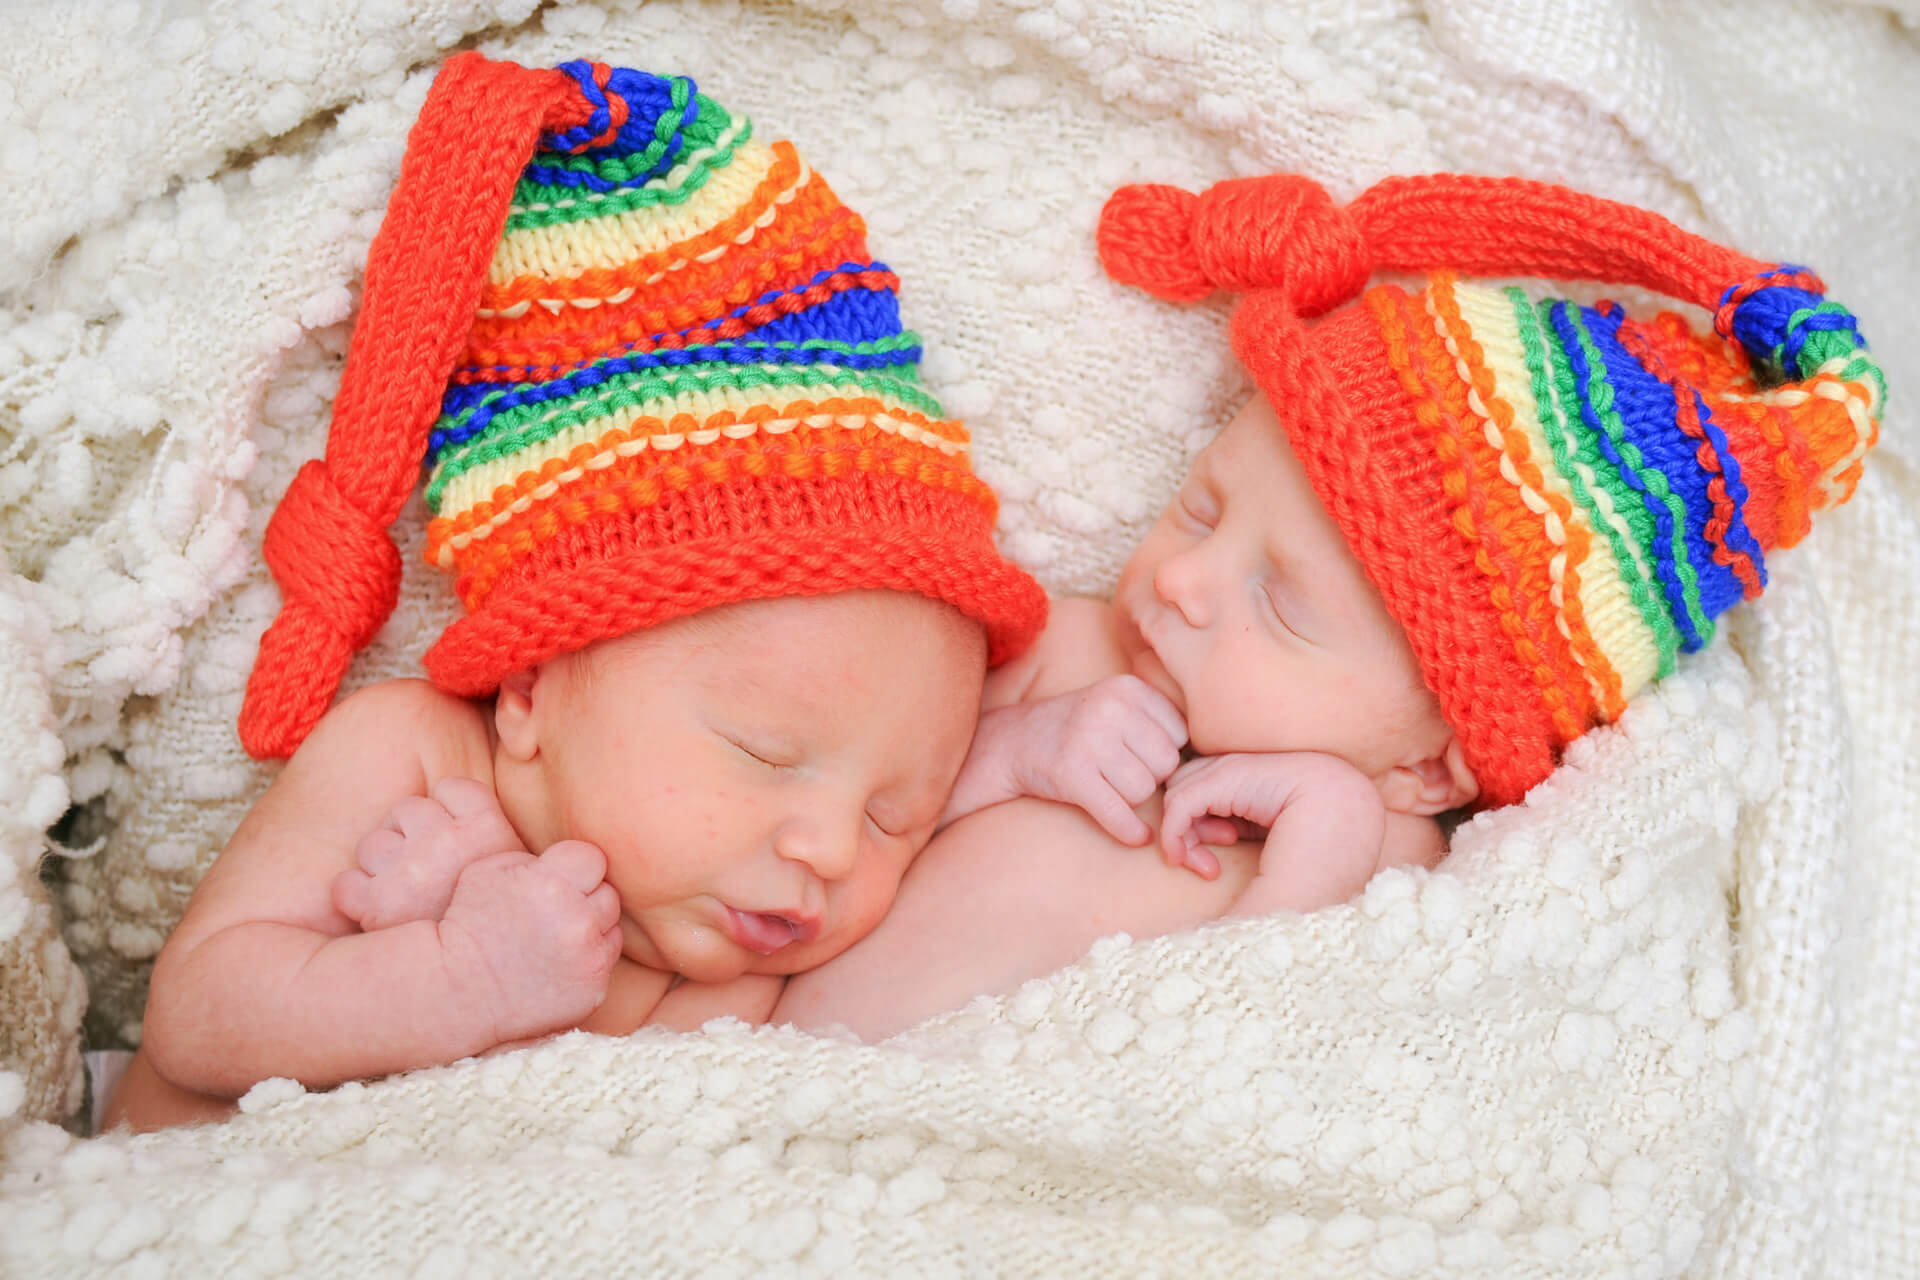 Best Detroit baby photographer photographs rainbow twins during their 6 day old newborn lifestyle session in metro Detroit, Michigan.